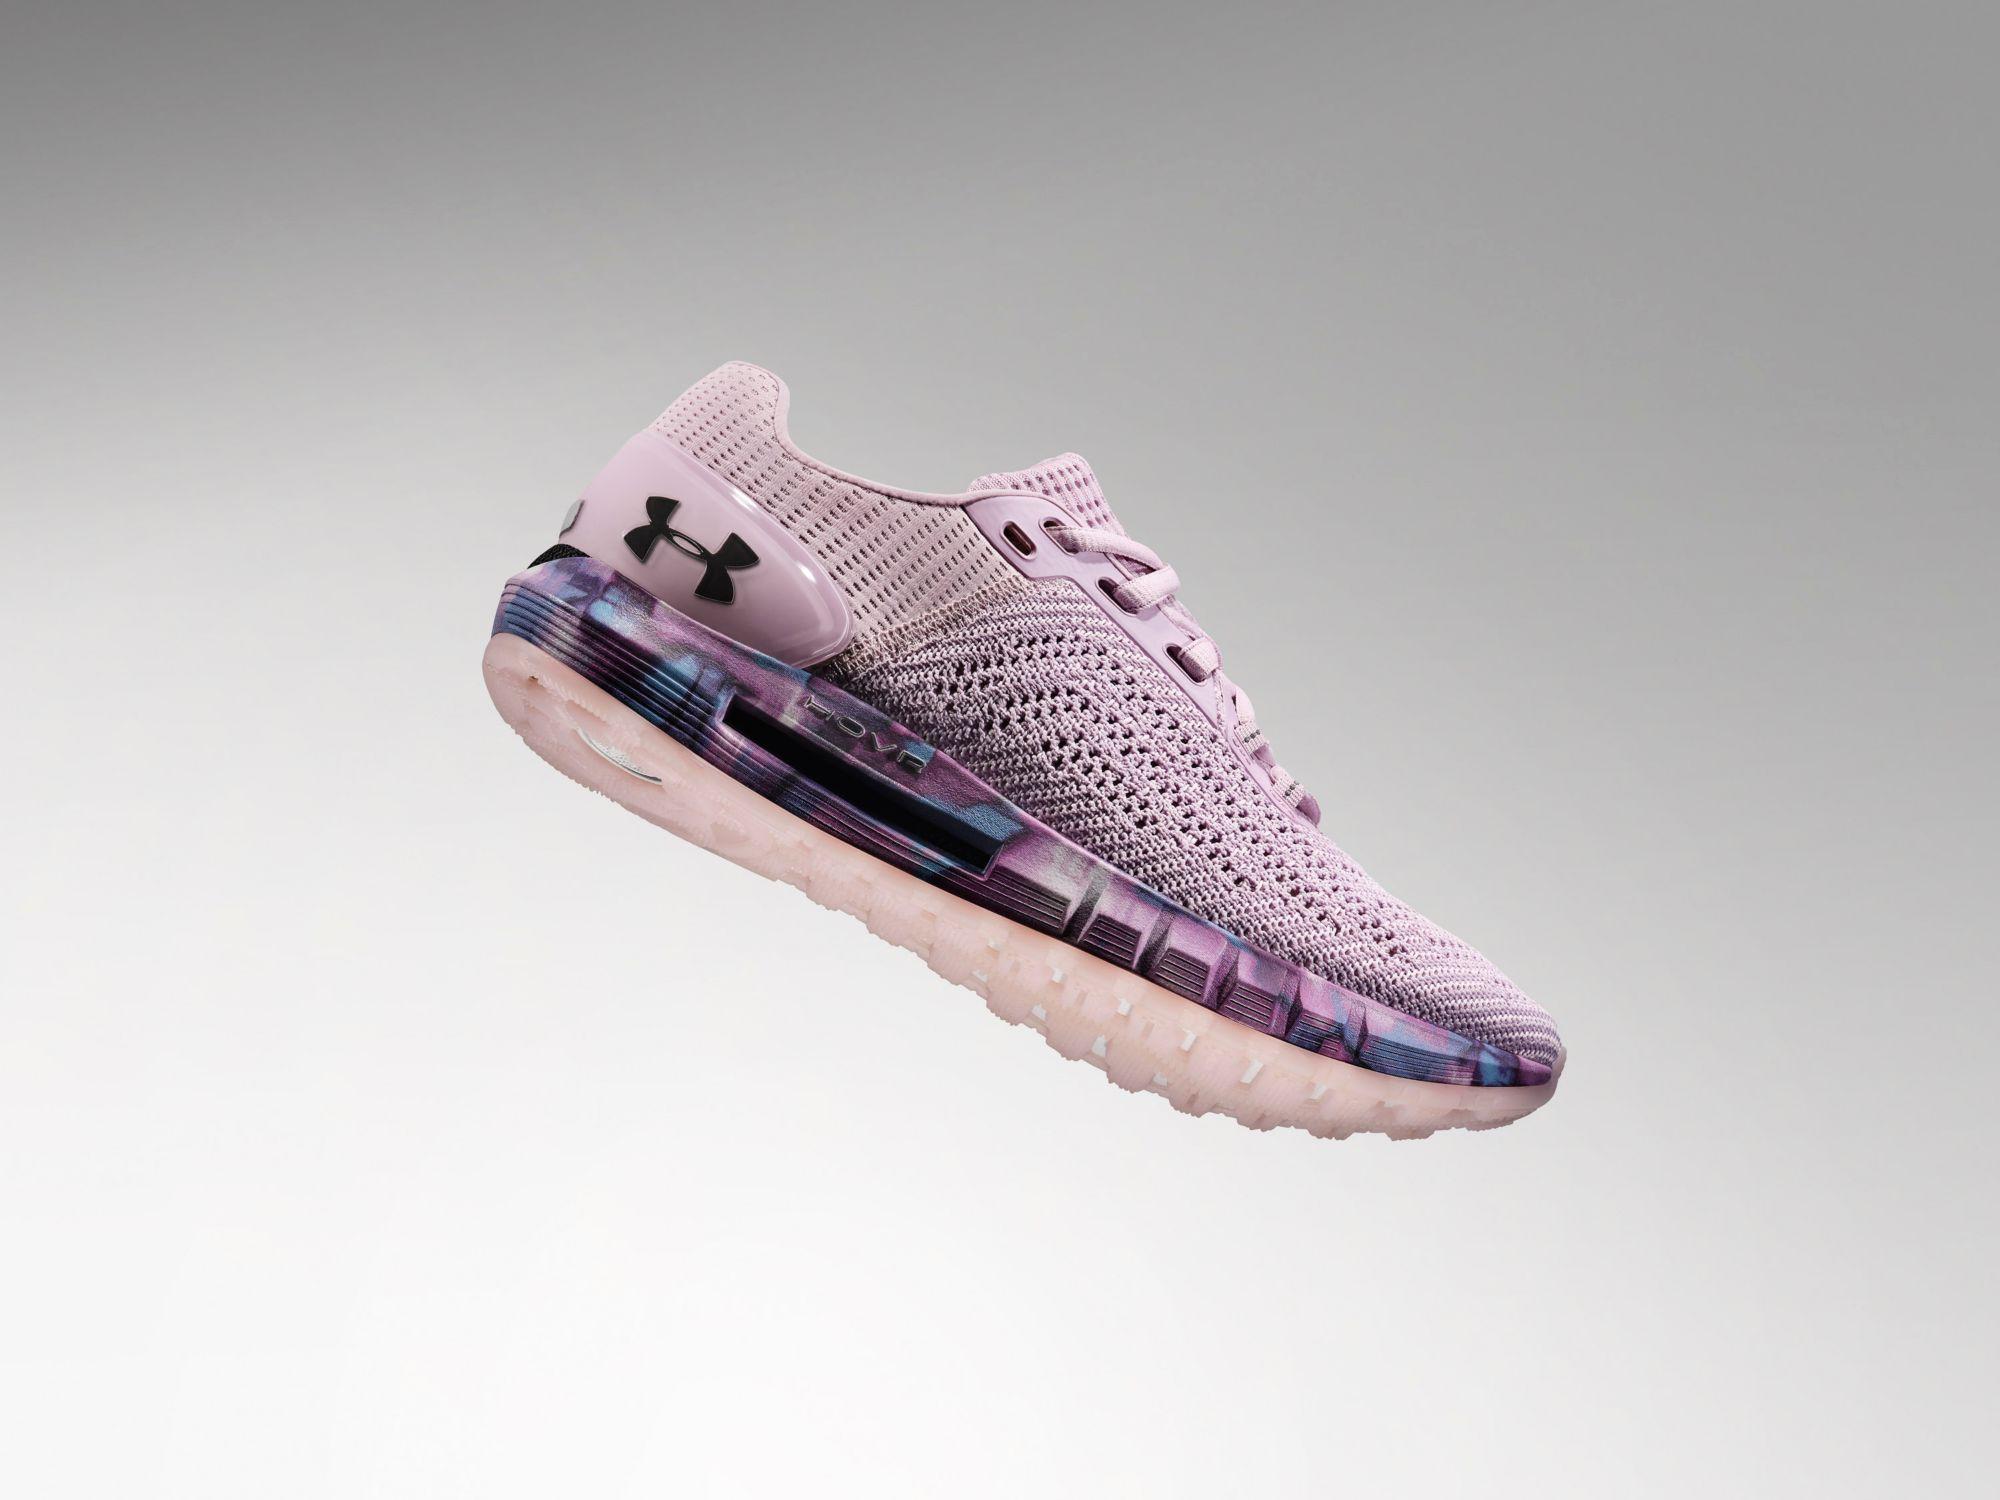 Under Armour Rubber Hovr Sonic 2 Hype Running Shoes in Pink/Grey (Pink) |  Lyst